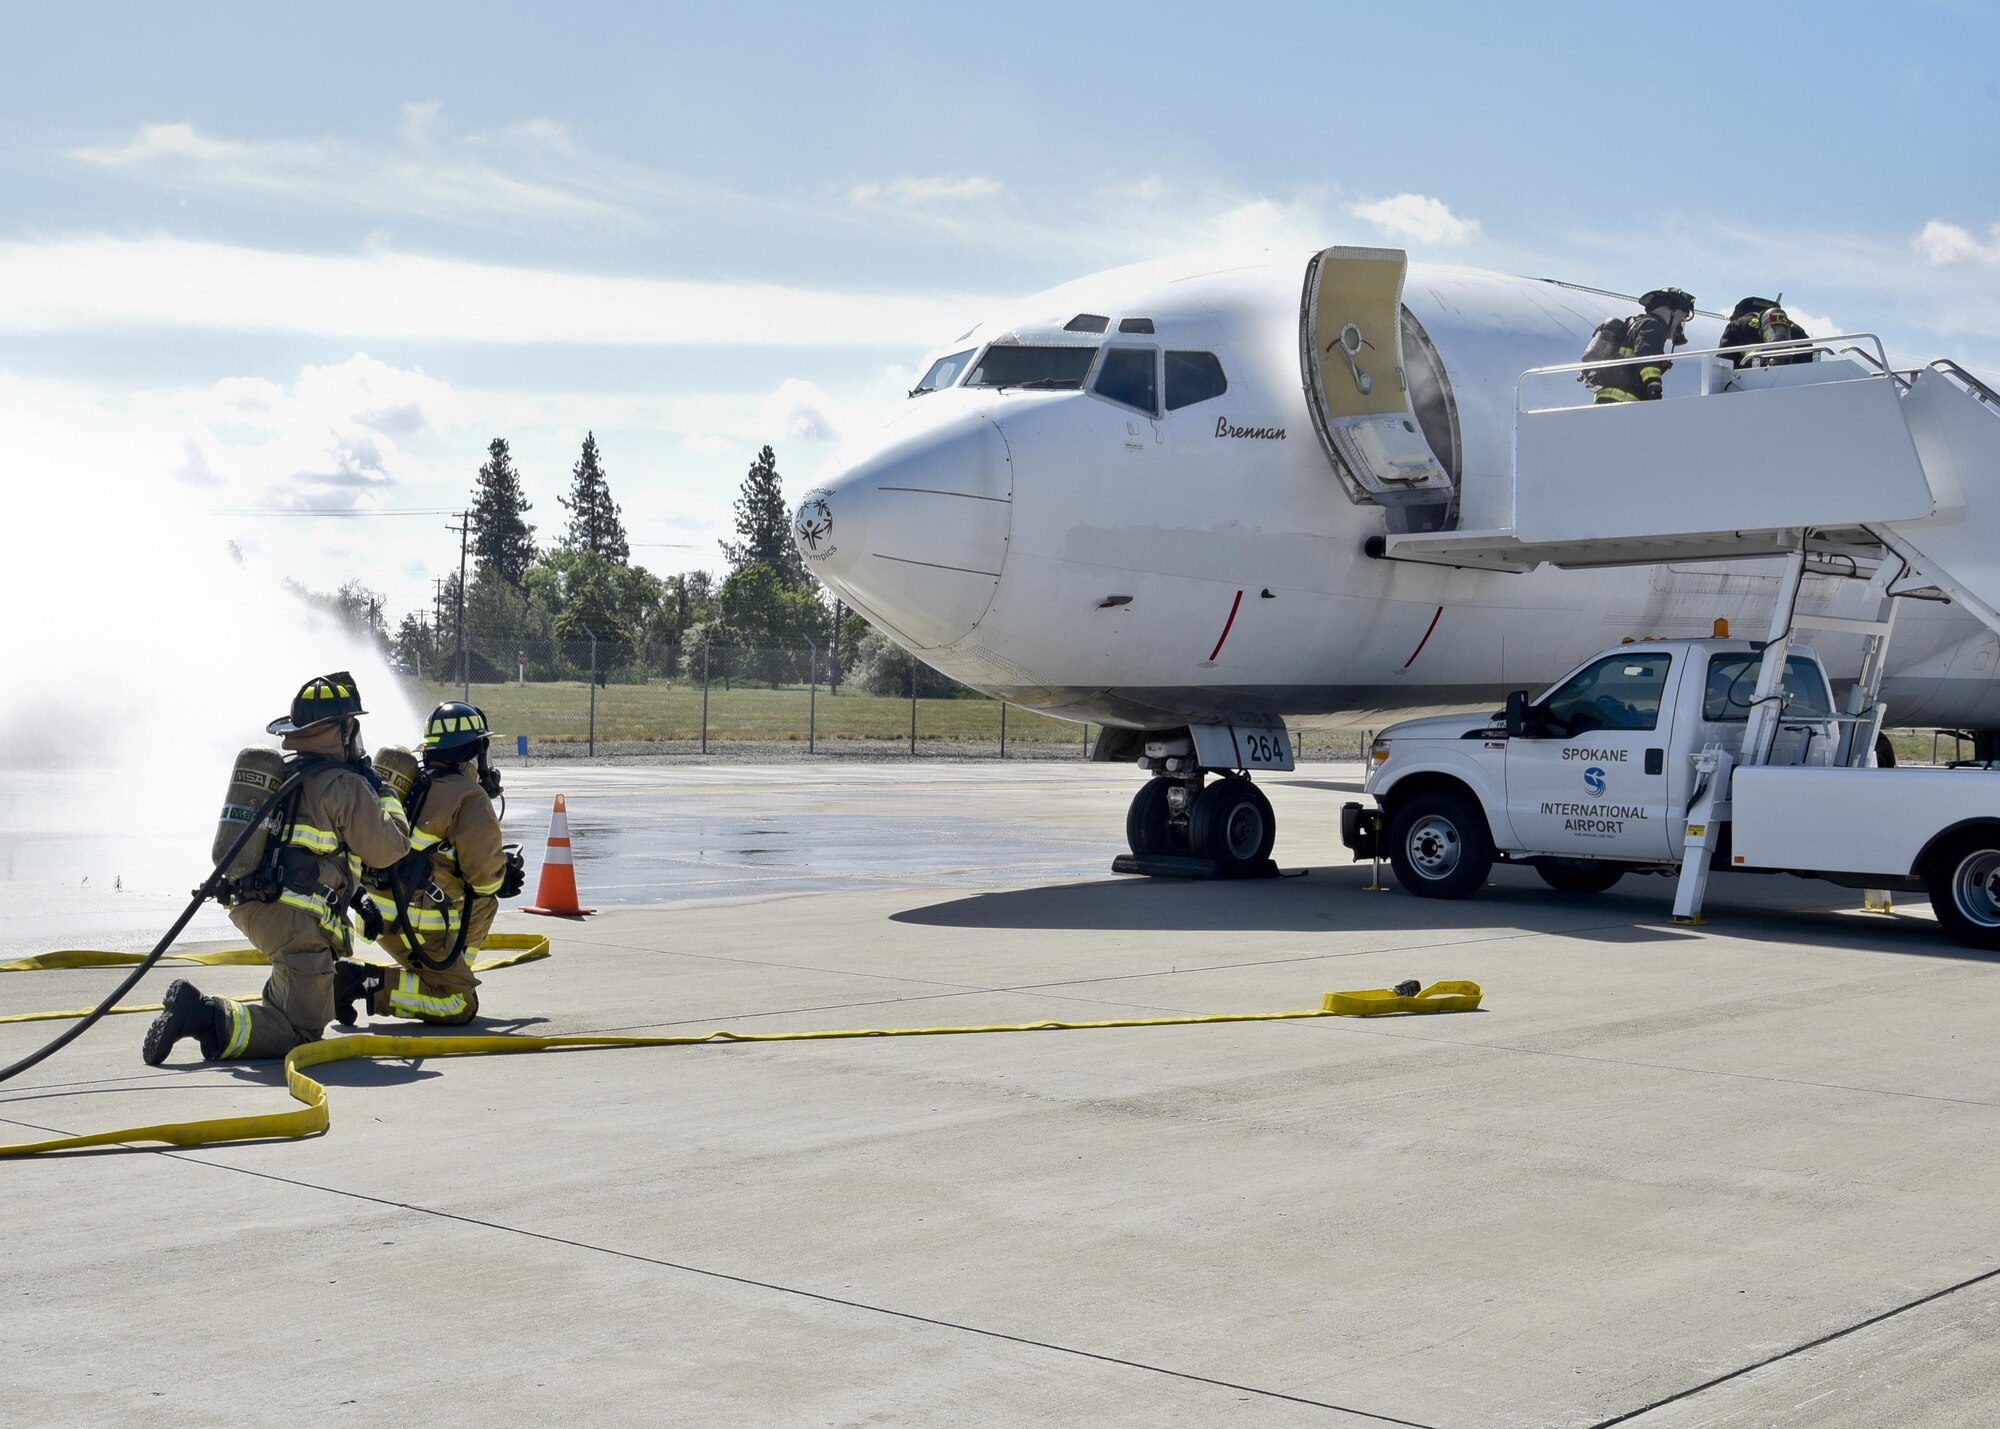 92nd Civil Engineer Squadron firefighters assist Spokane International Airport firefighters during an exercise June 9, 2016, at Spokane International Airport, Wash. The exercise simulated an aircraft crash during an emergency landing with 112 passengers on board. The objective was to provide responders with the opportunity to practice the airport’s Emergency Response Plan. (U.S. Air Force photo/Airman 1st Class Taylor Shelton) 